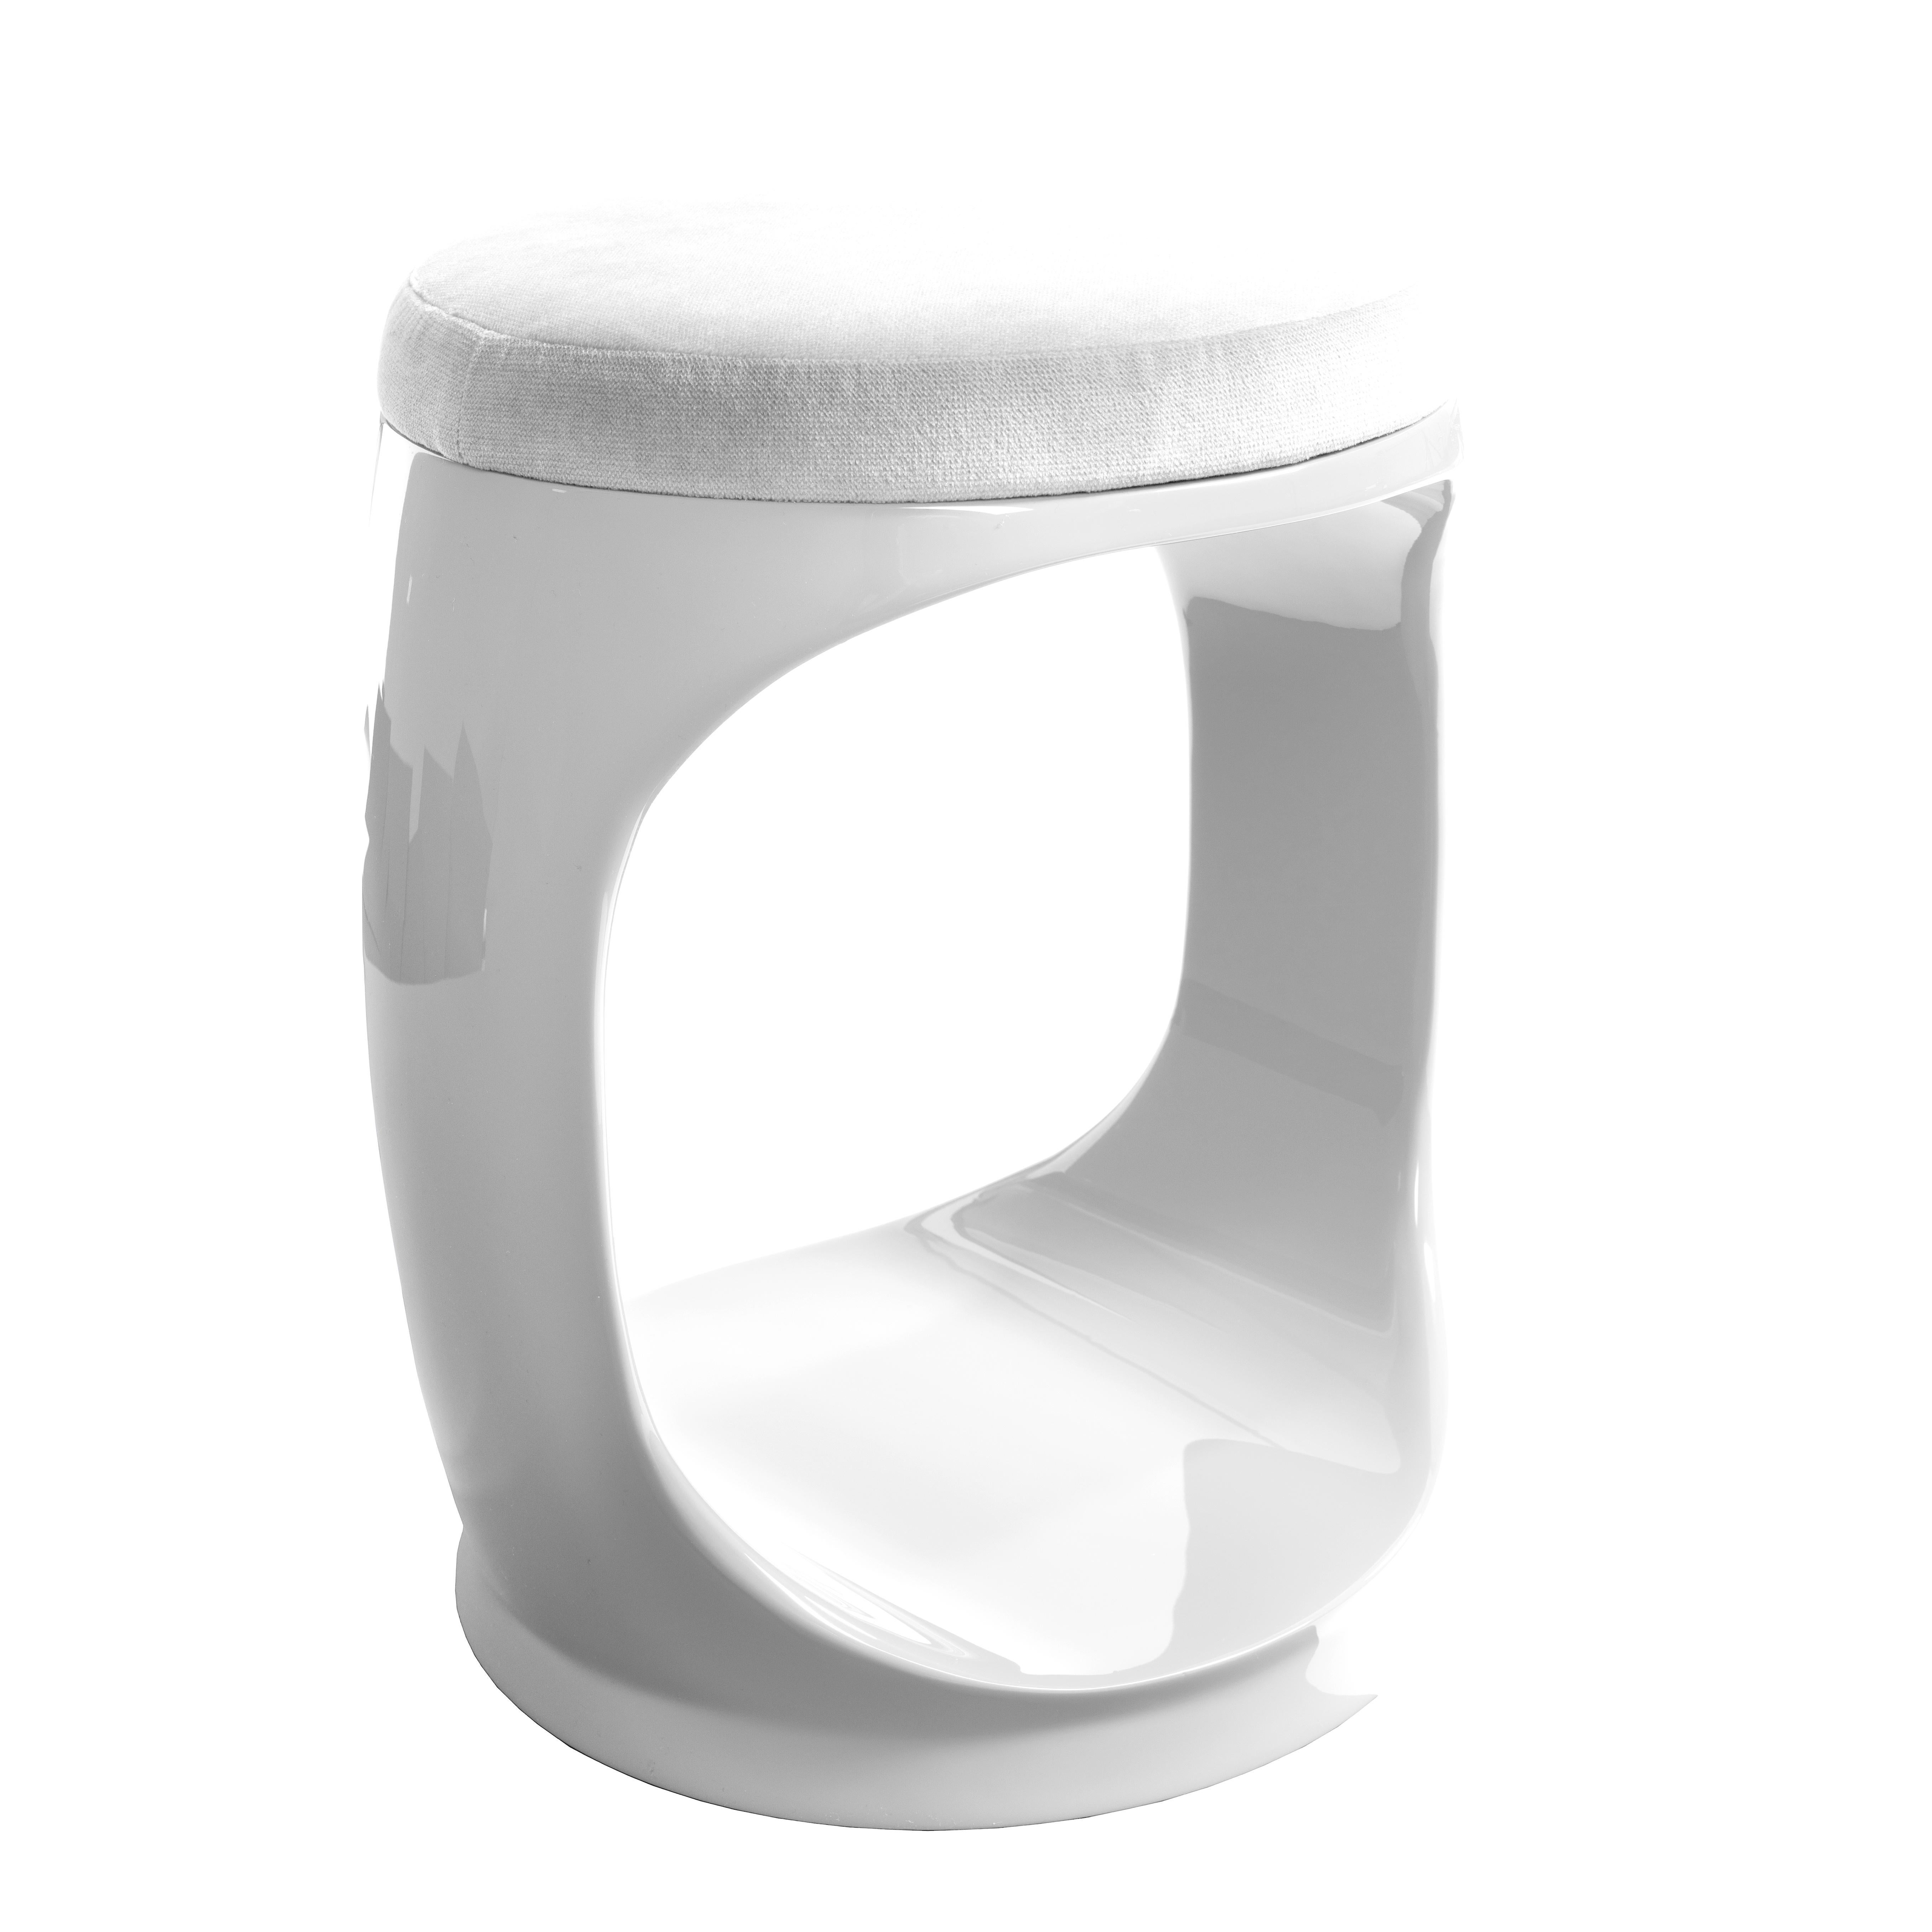 Contemporary Pouf by Cyril Rumpler Signet Ring, Hocker, Stool, navy white.
These stools are available in a dozen colors and in a glossy finish. The black, white, navy blue, pink, red, turquoise, lilac, brown, green, and grey stools are available